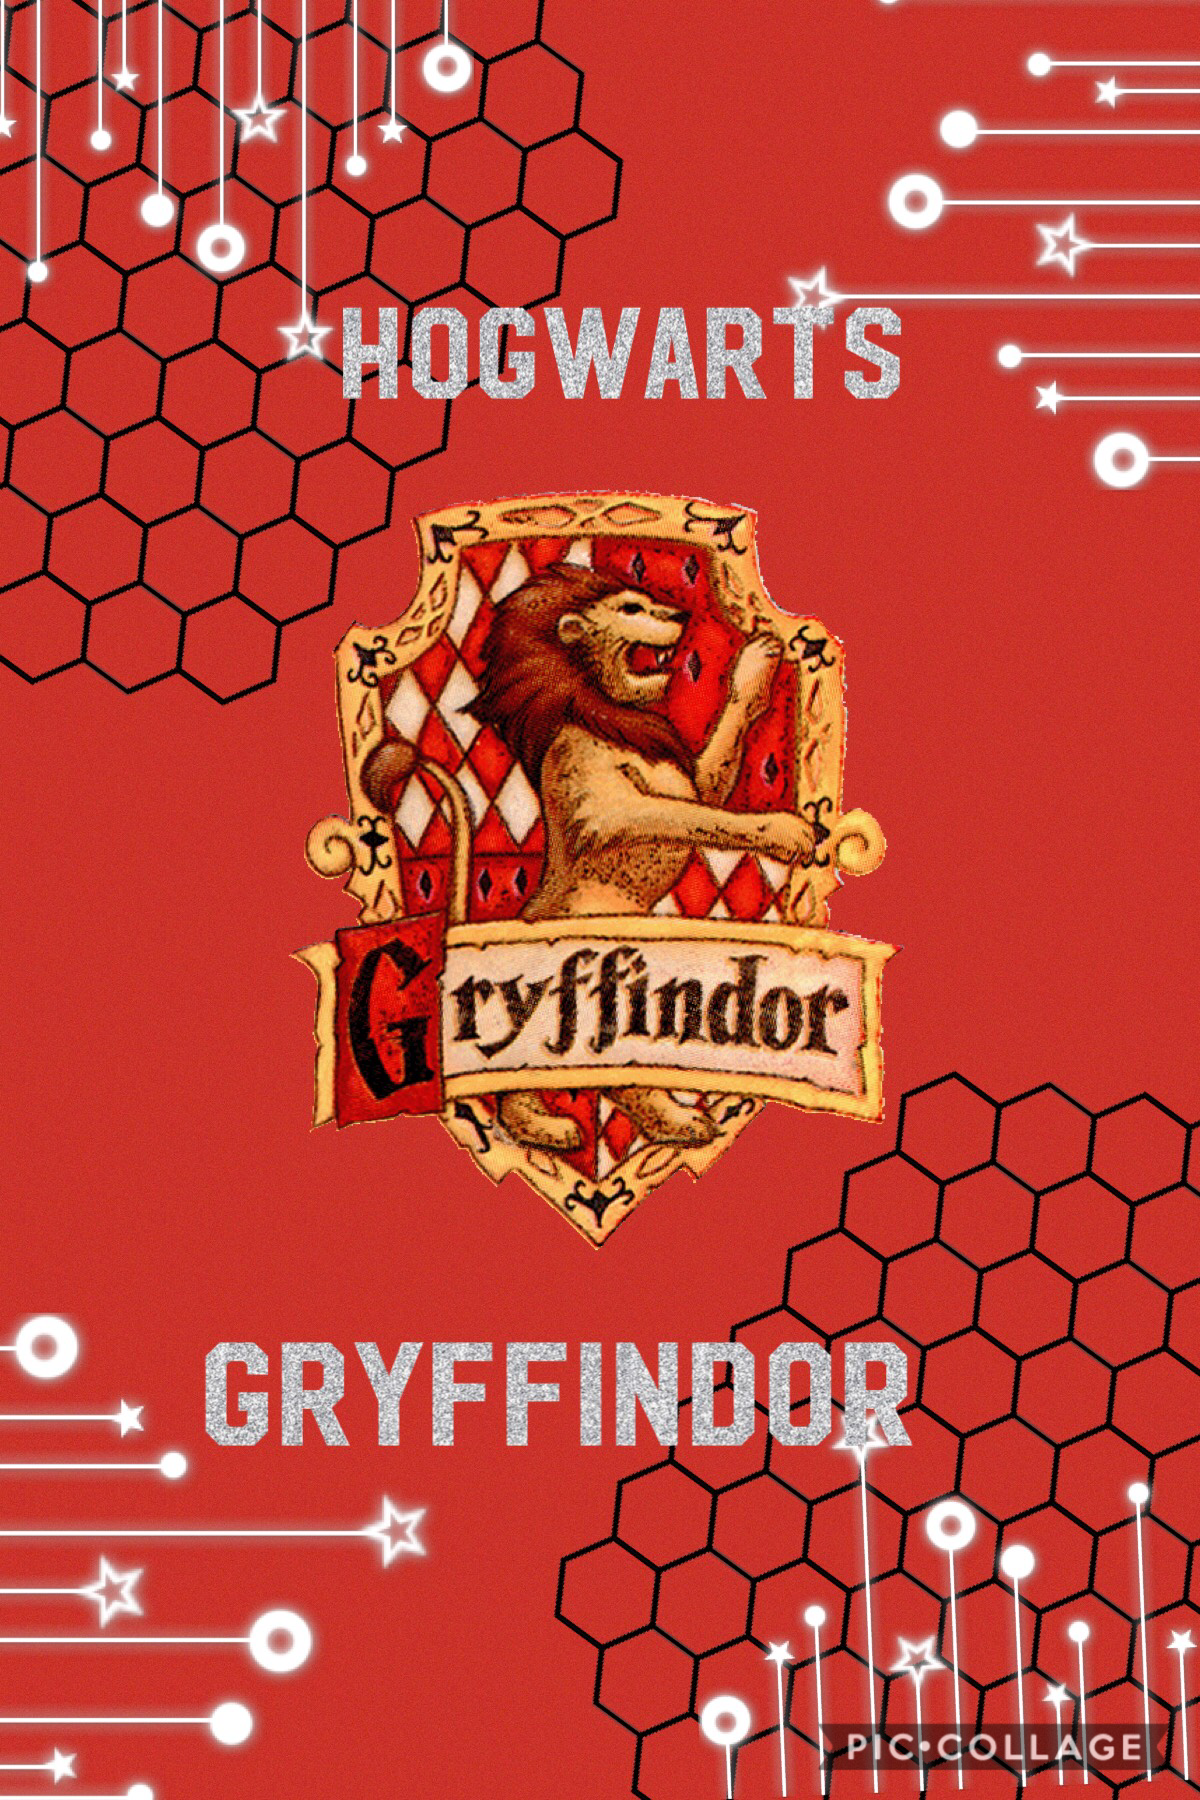 Im am a gryiffindor and if you don't know what it is 
Gryiffindor- brave loyalty honesty and saws anything they feel like